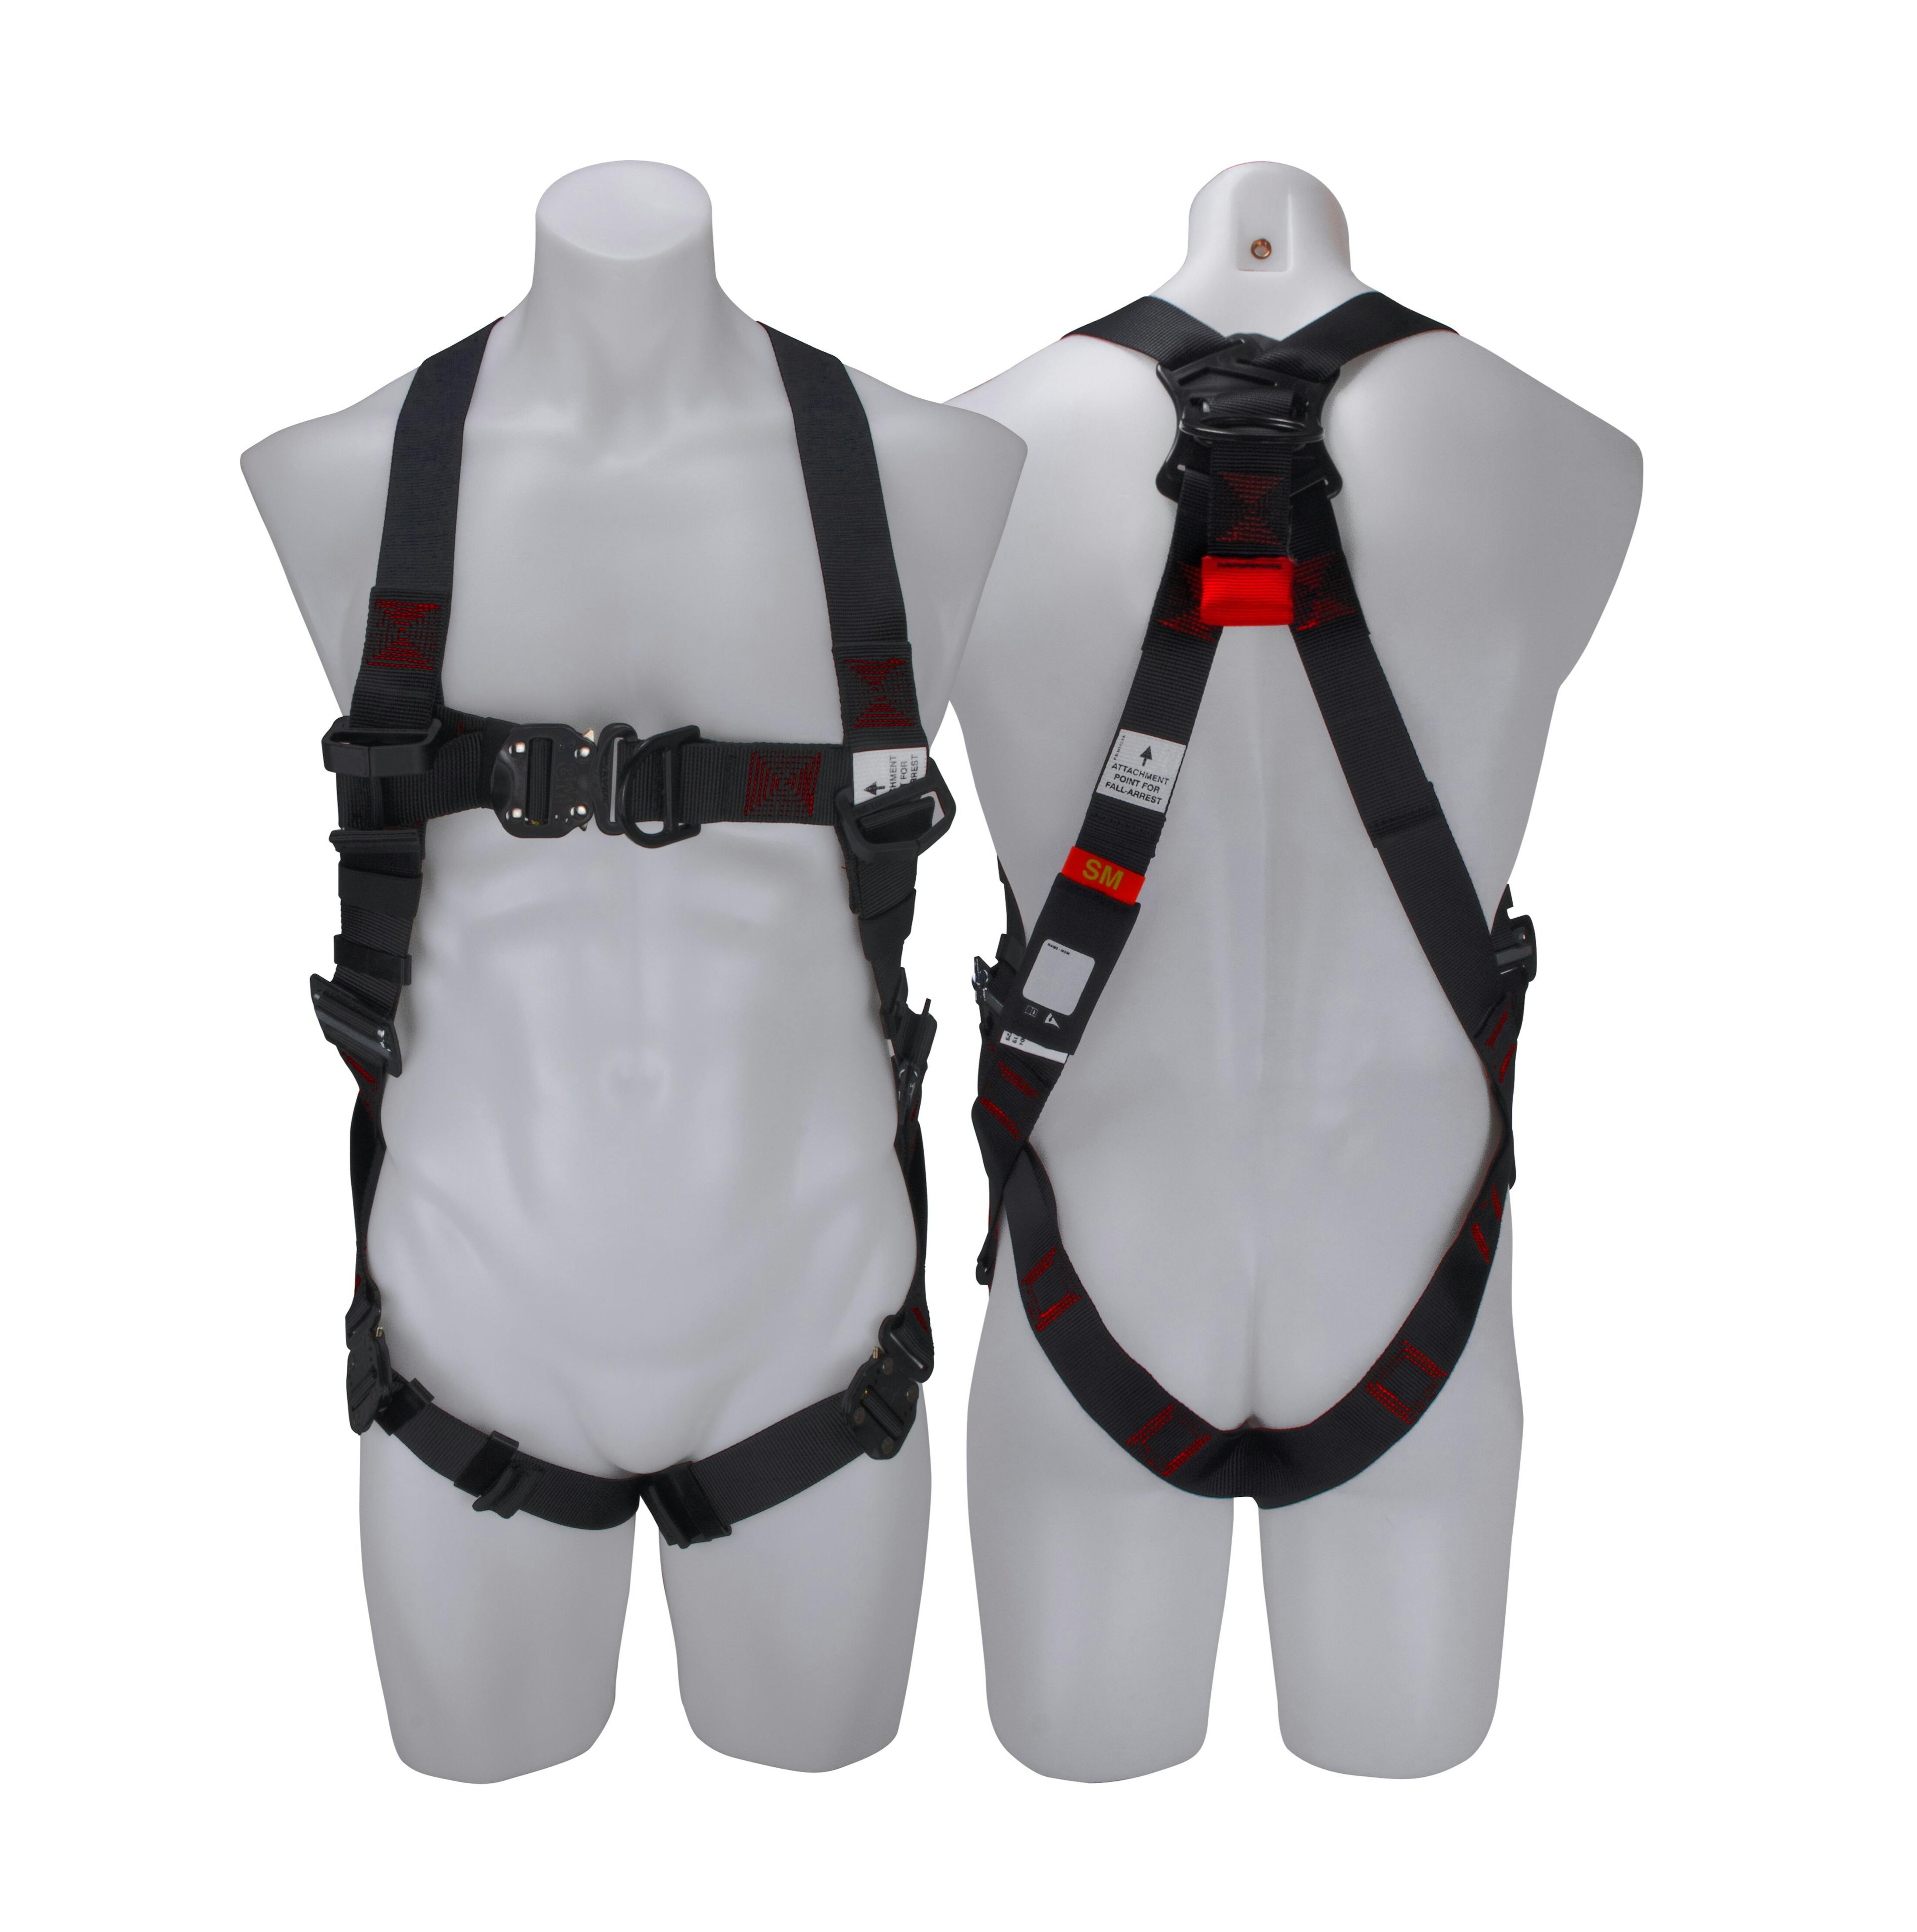 3M™ PROTECTA® X Riggers Harness 1161673, Red and Black, Medium, 1 EA/Case